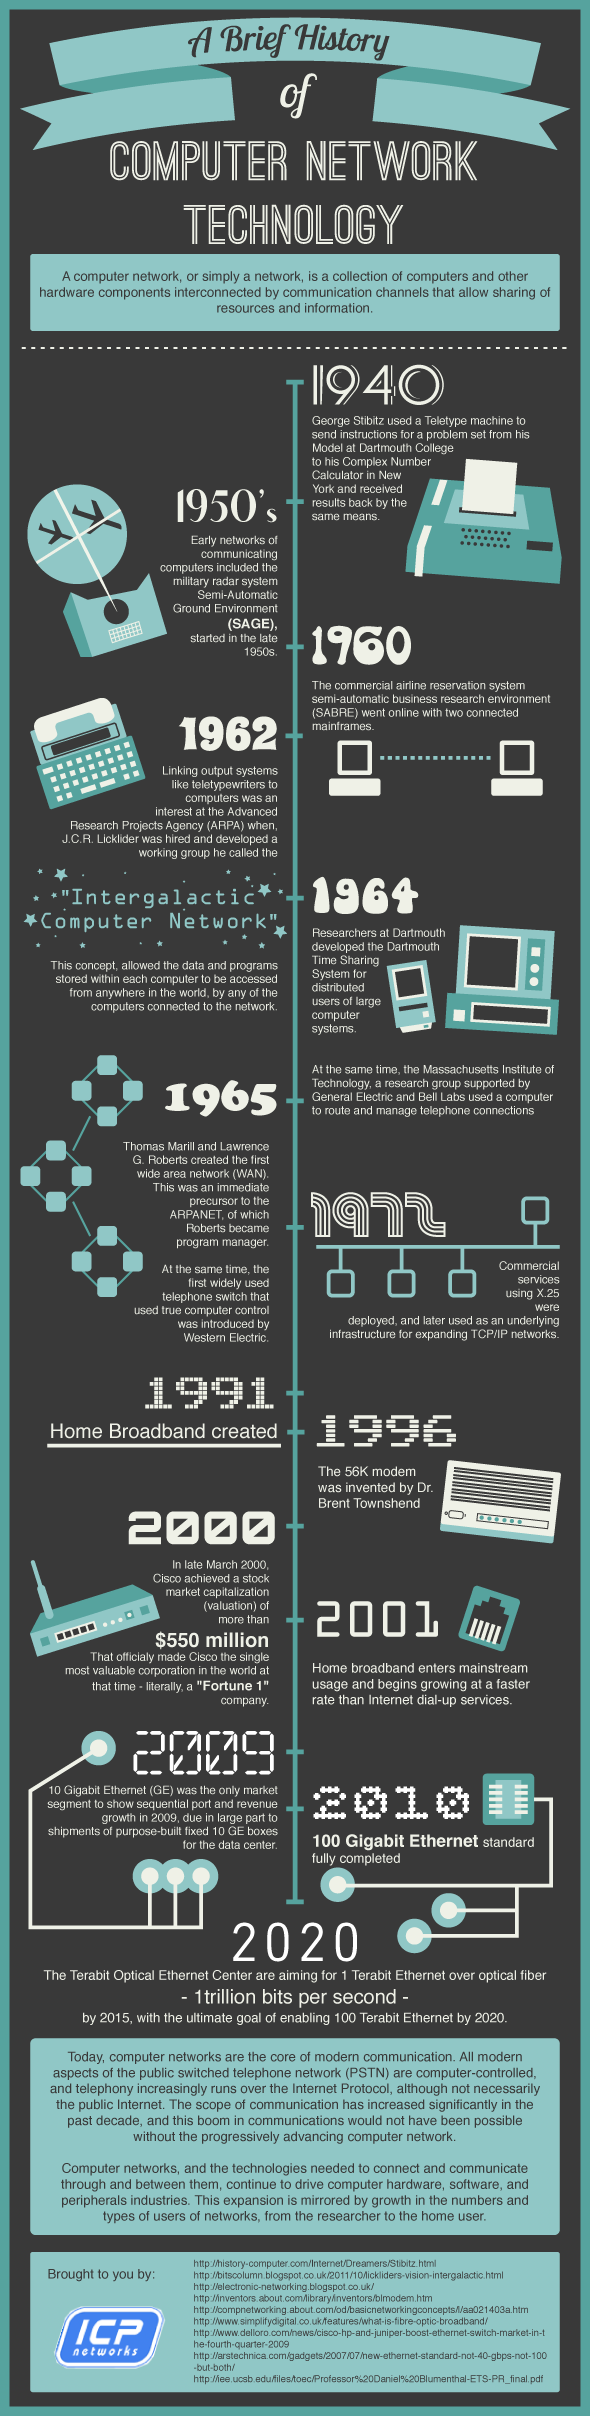 computer network technology infographic